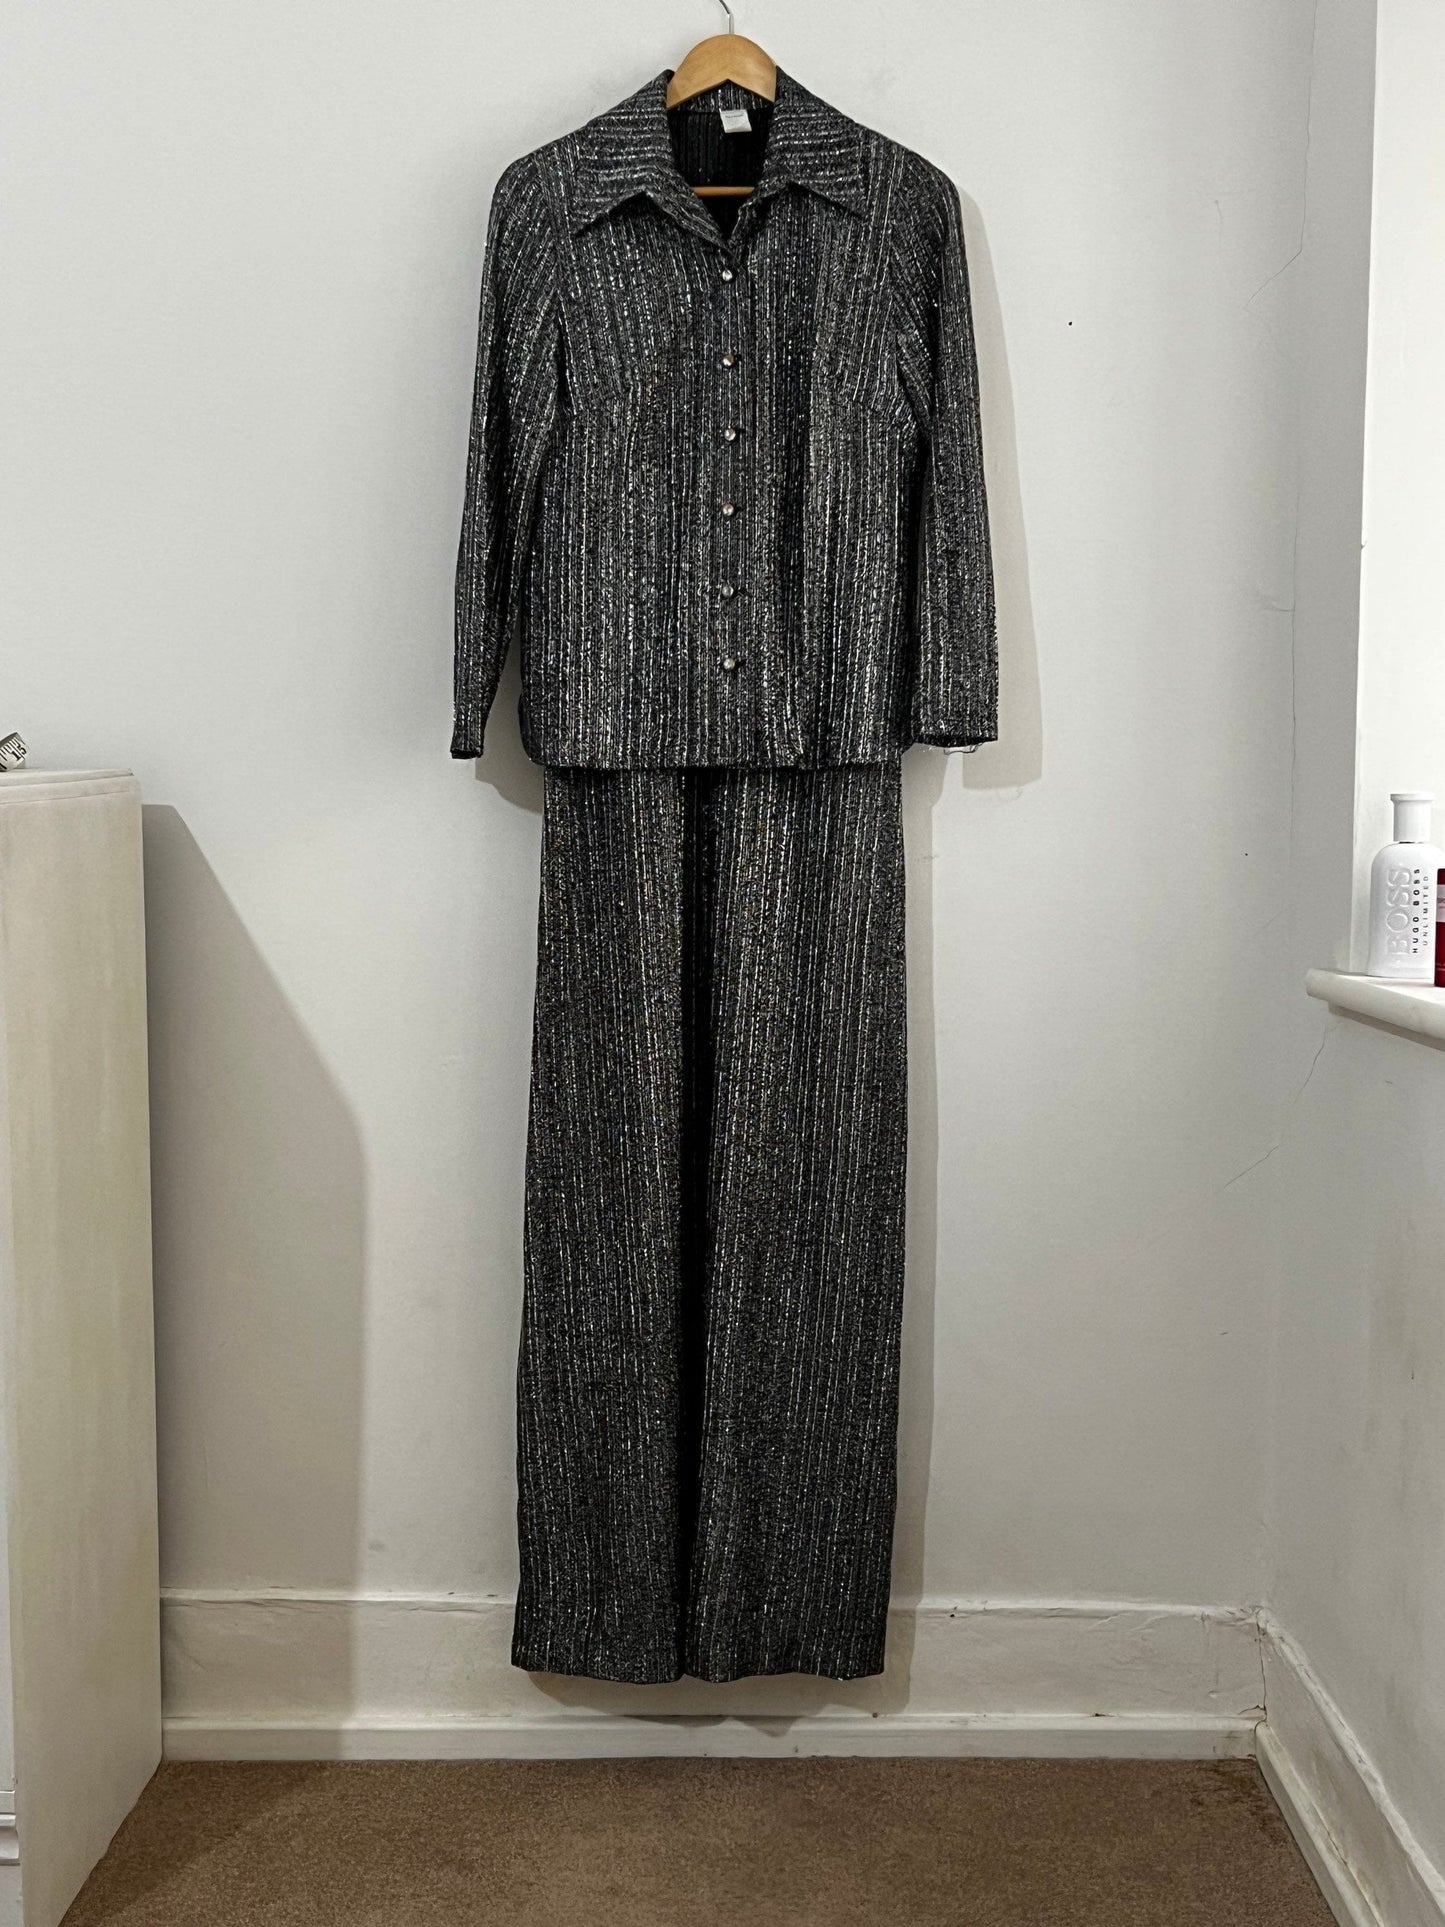 Vintage Silver Metallic Thread Dress and Matching Jacket Length Black and Silver UK Size